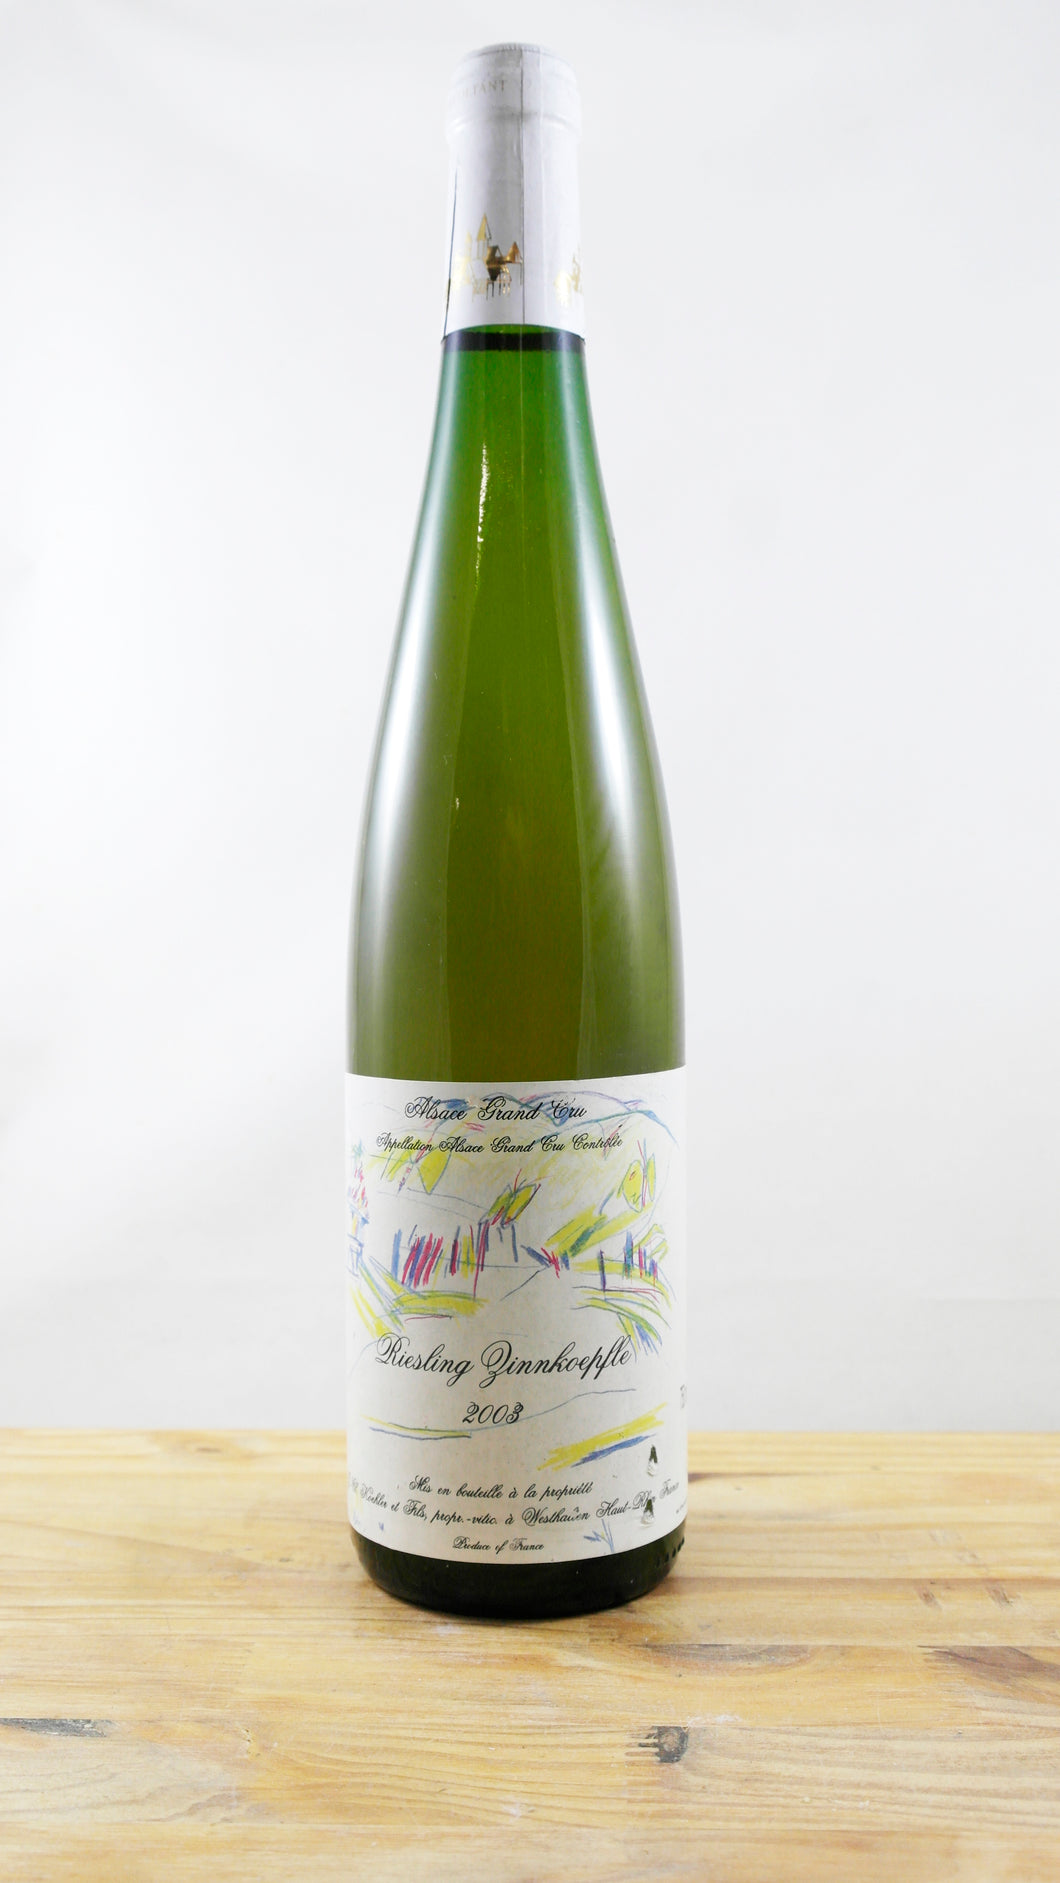 Vin Année 2003 Riesling Ginnkoepfle